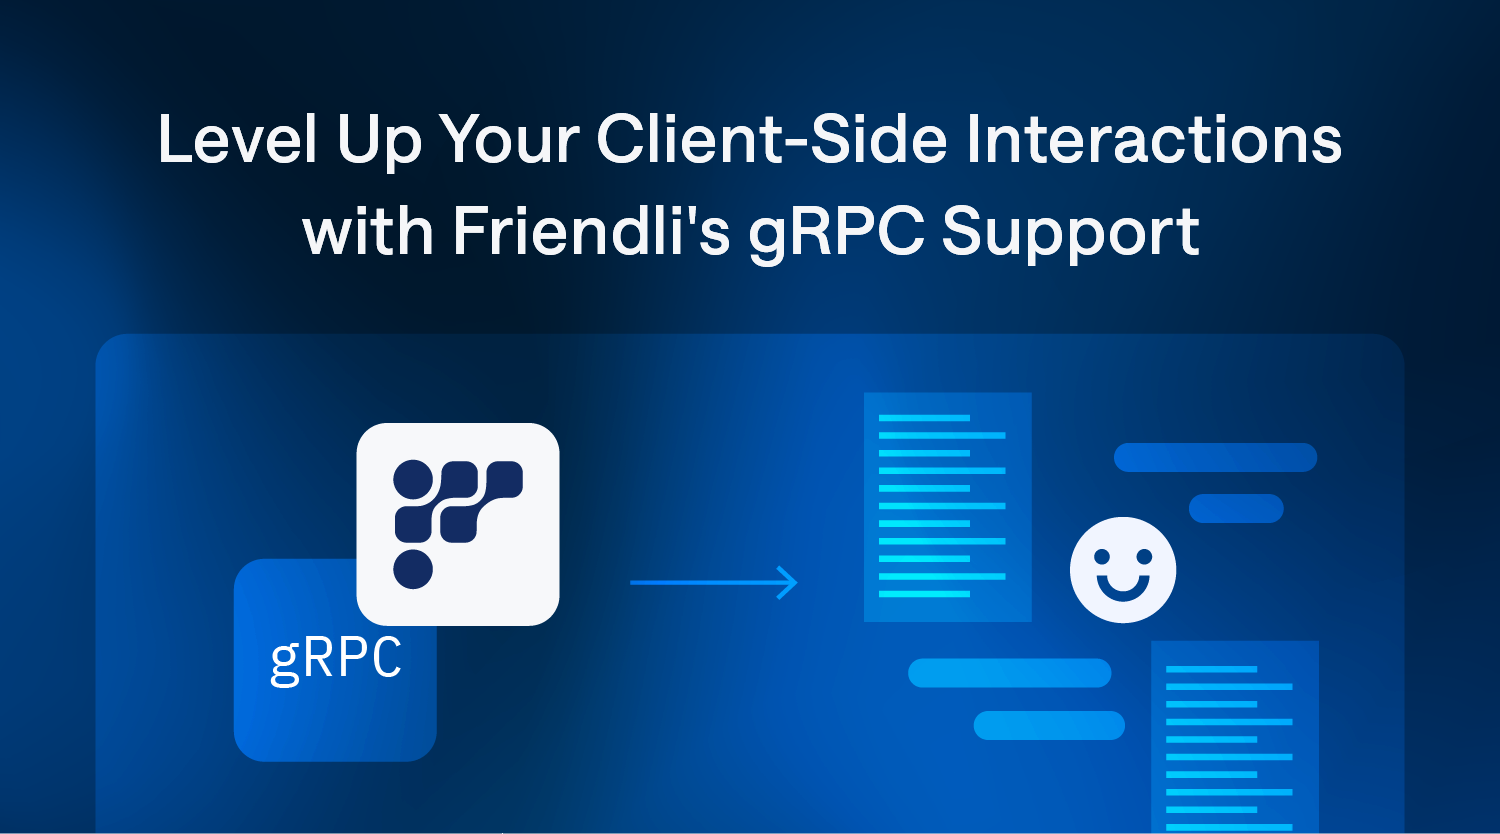 Level Up Your Client-Side Interactions with Friendli's gRPC Support thumbnail